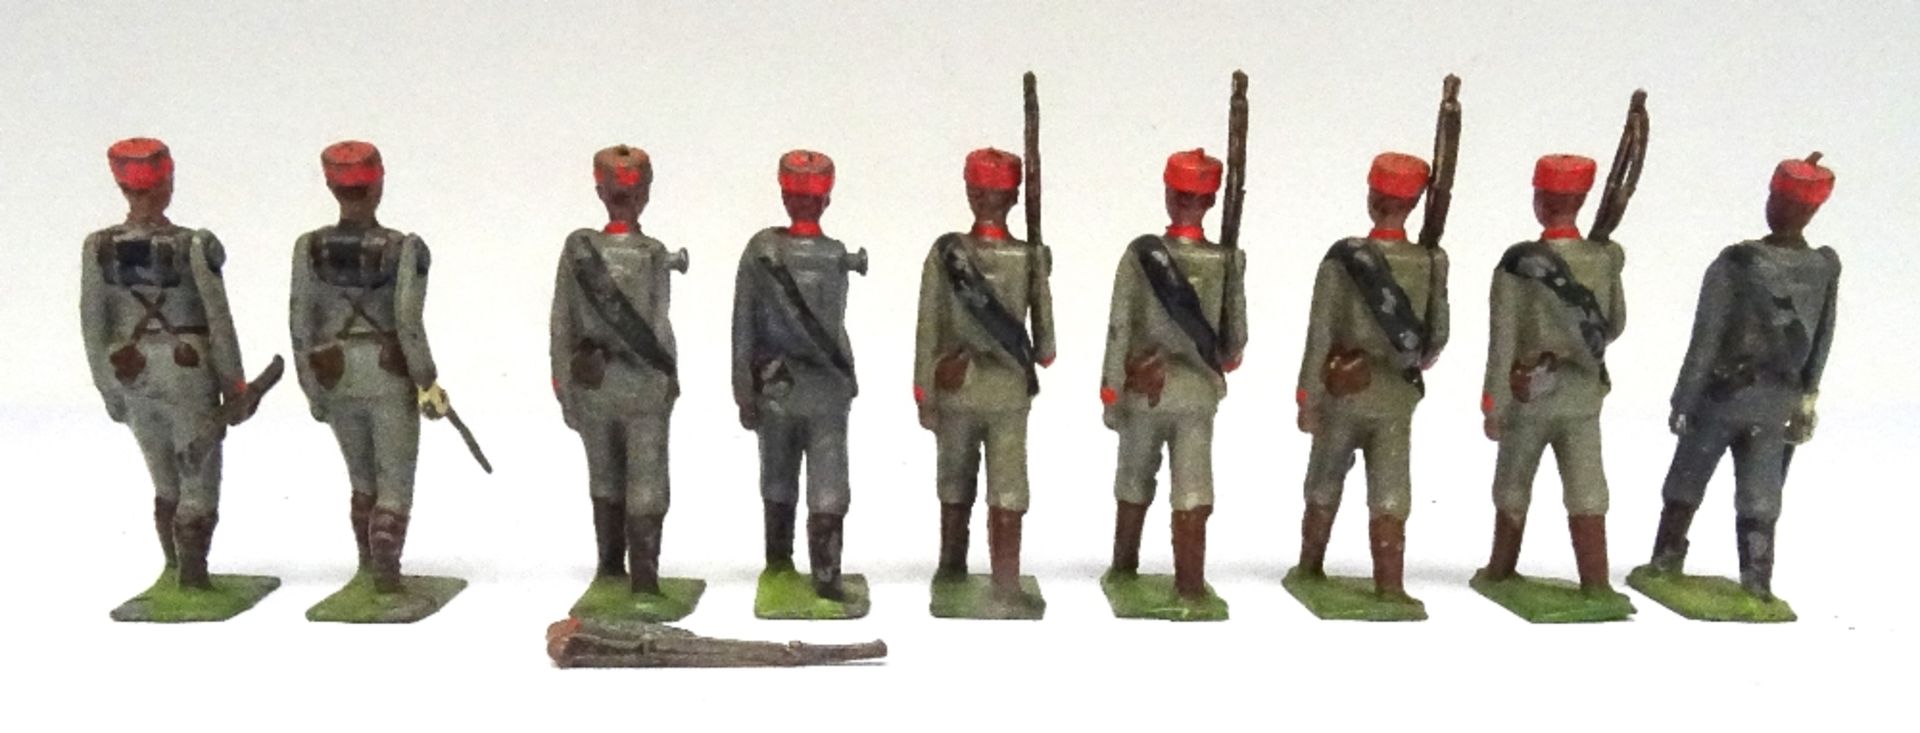 Britains from set 174 Montenegrin Infantry - Image 4 of 7